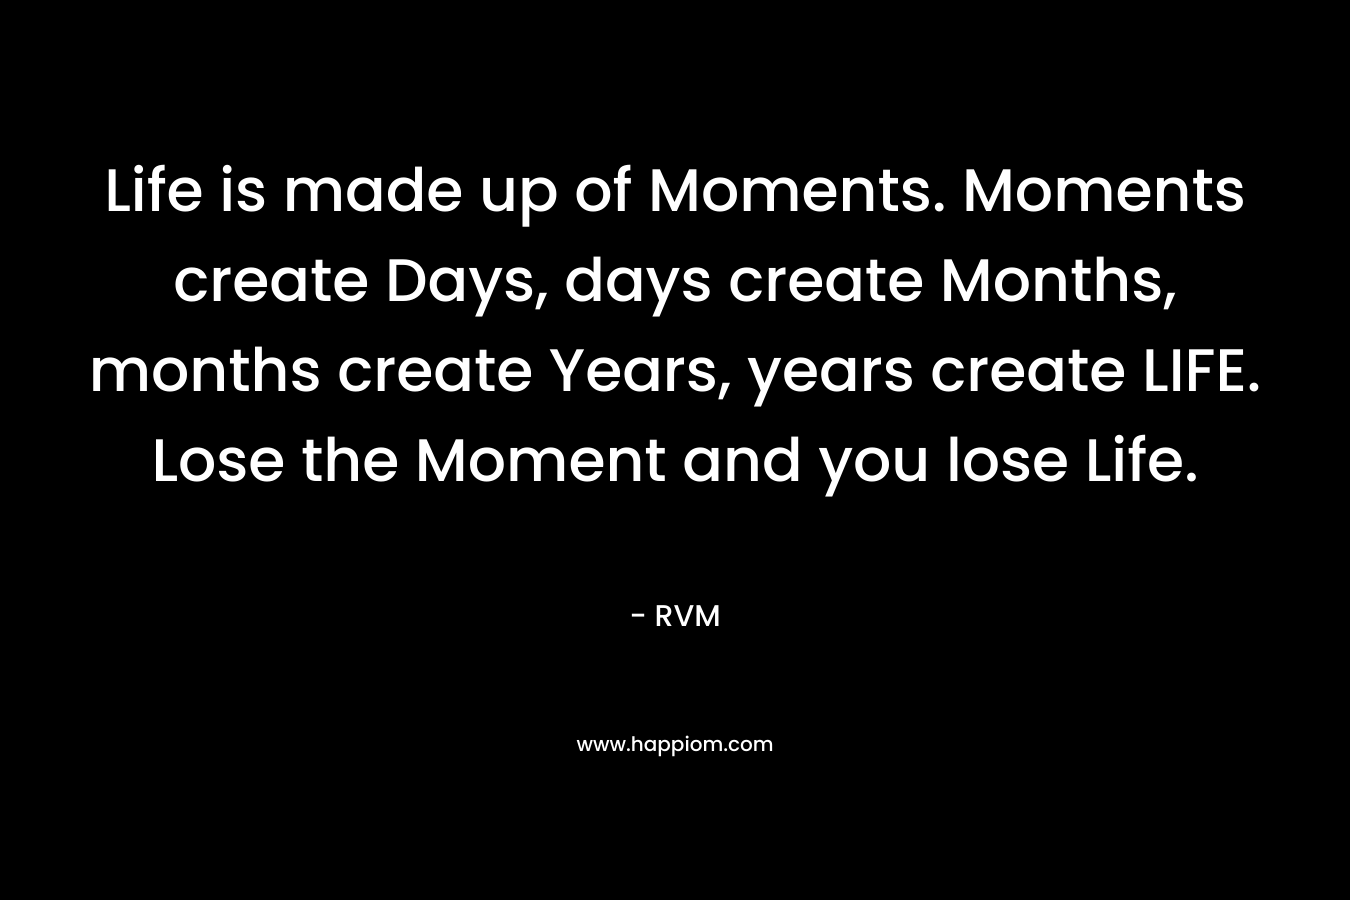 Life is made up of Moments. Moments create Days, days create Months, months create Years, years create LIFE. Lose the Moment and you lose Life.